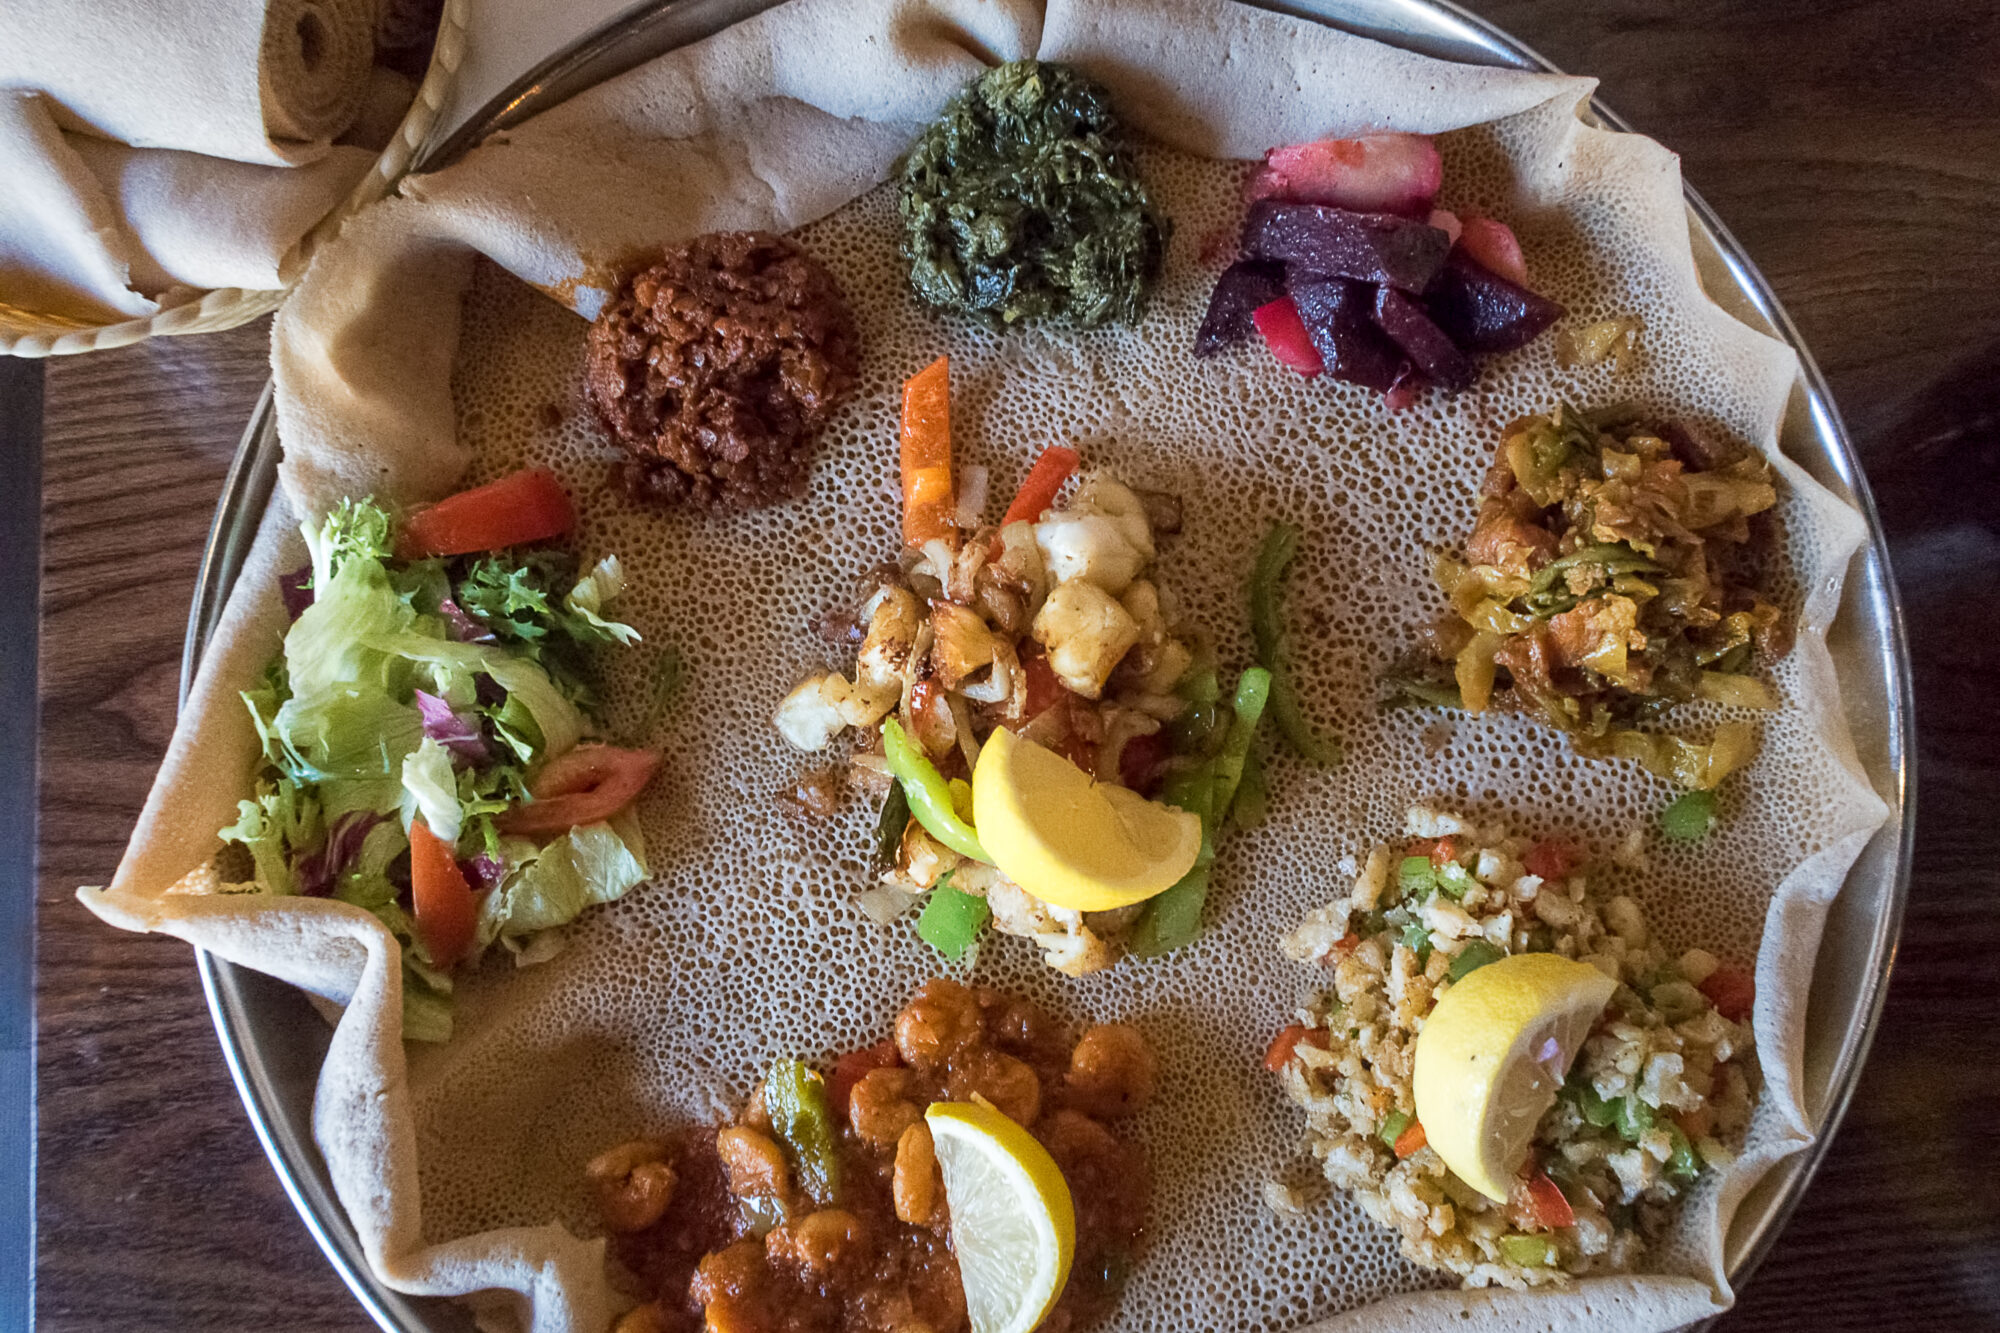 A plate of injera with various toppings, viewed from above.